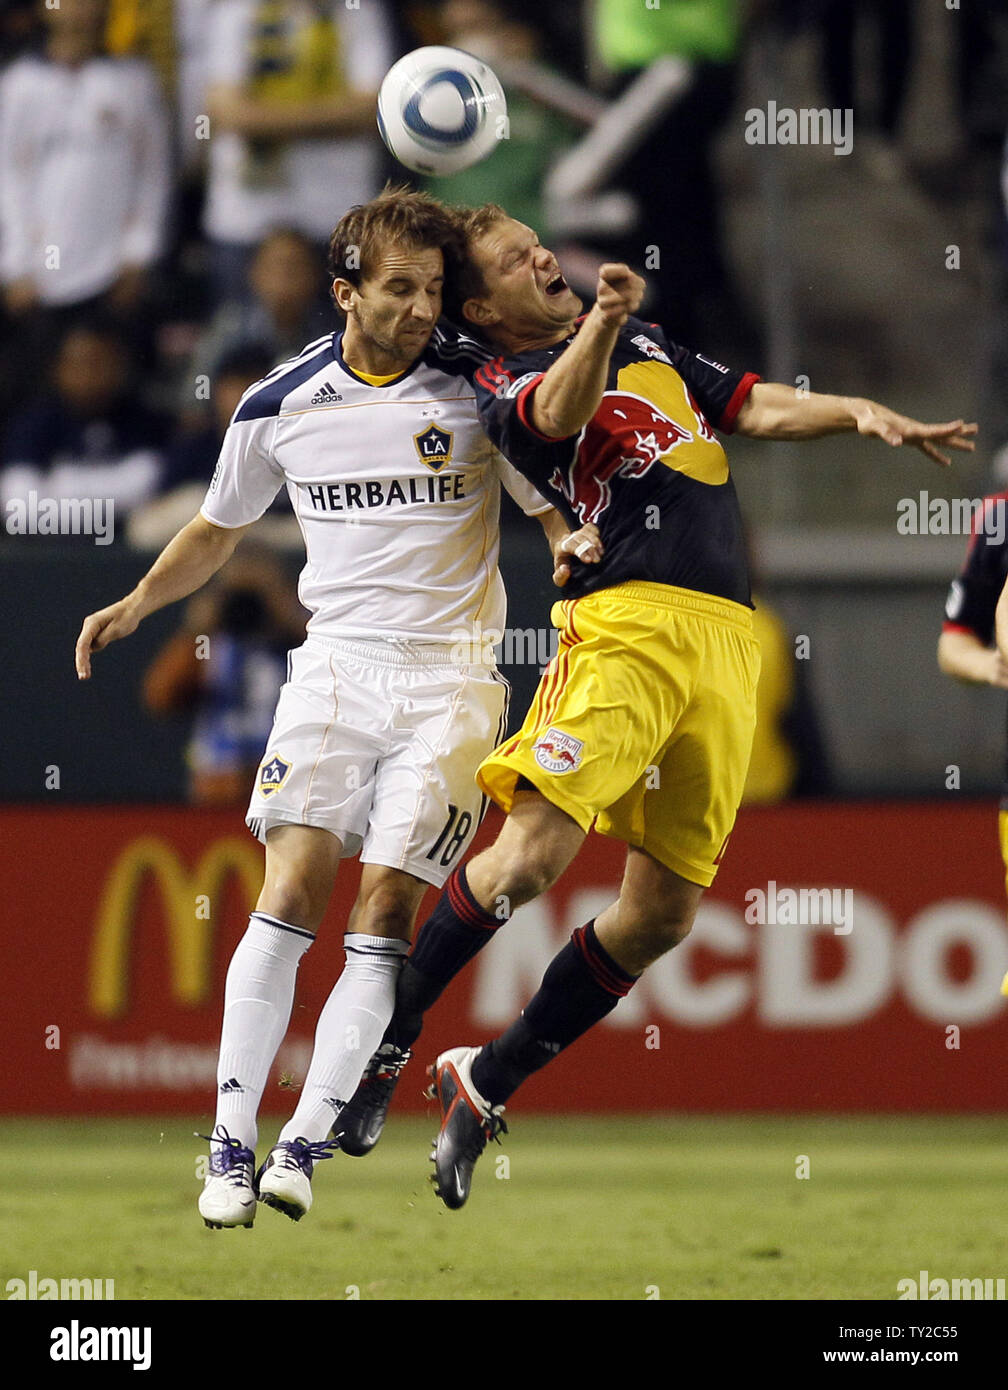 Los Angeles Galaxy forward Mike Magee (18) and New York Red Bulls defender/midfielder Teemu Tainio (2) go for a header in the first half  in the MLS Western Conference Semifinals game at the Home Depot Center in Carson, California on Nov. 3, 2011.    UPI/Lori Shepler. Stock Photo